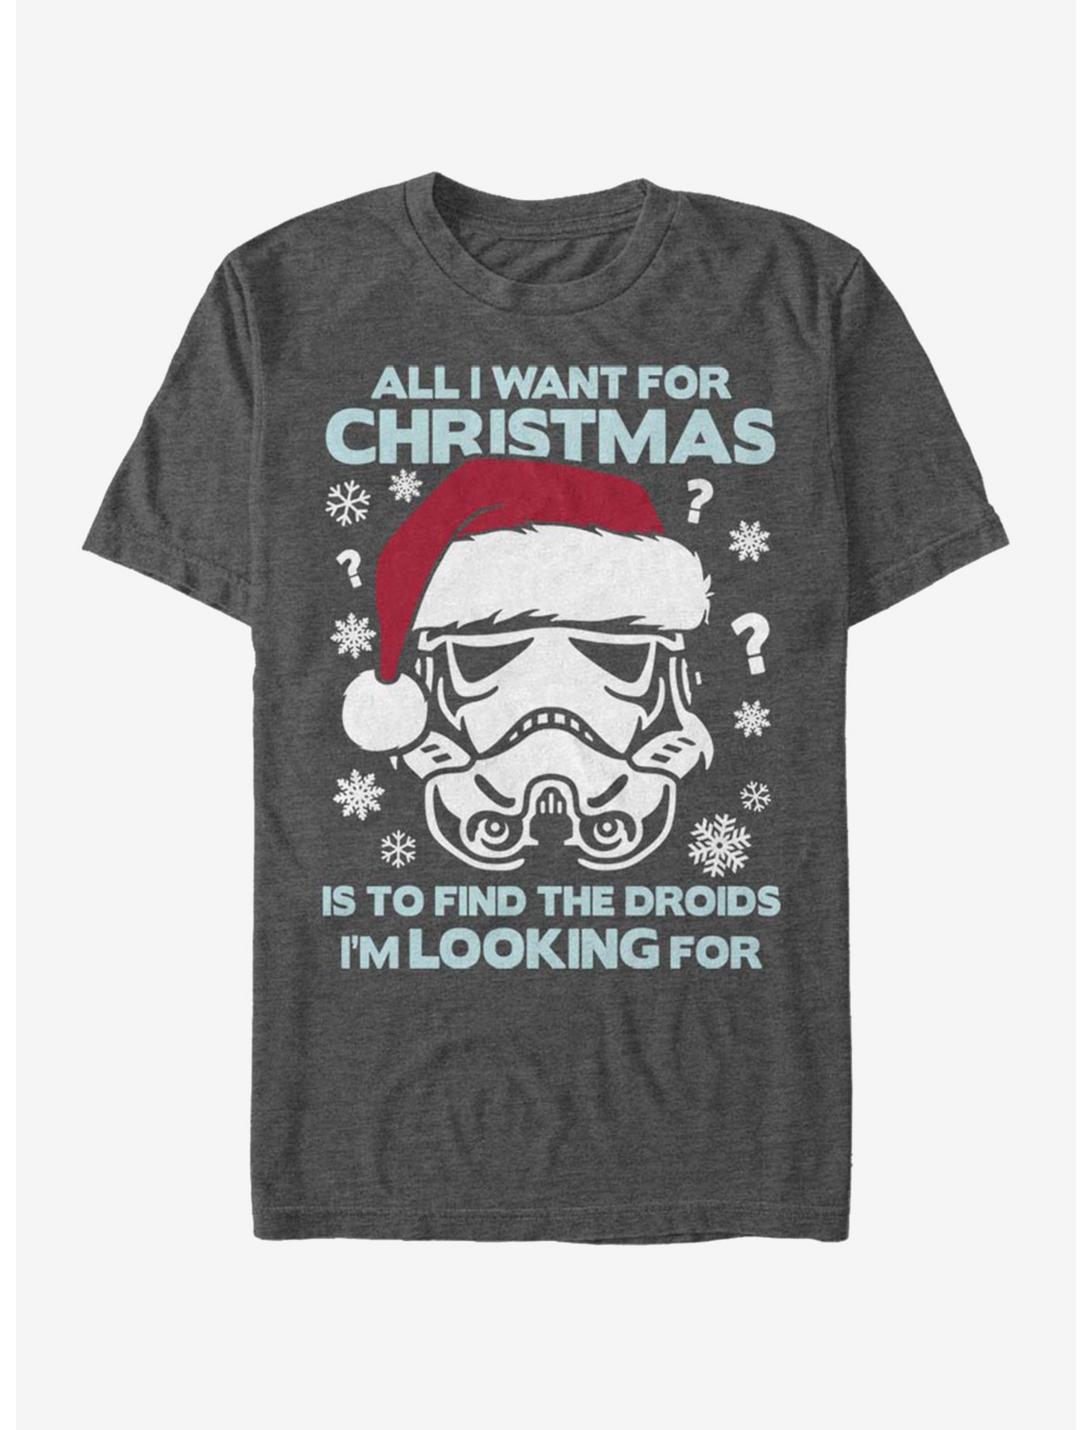 Star Wars Still Looking for Droids Christmas T-Shirt, CHAR HTR, hi-res